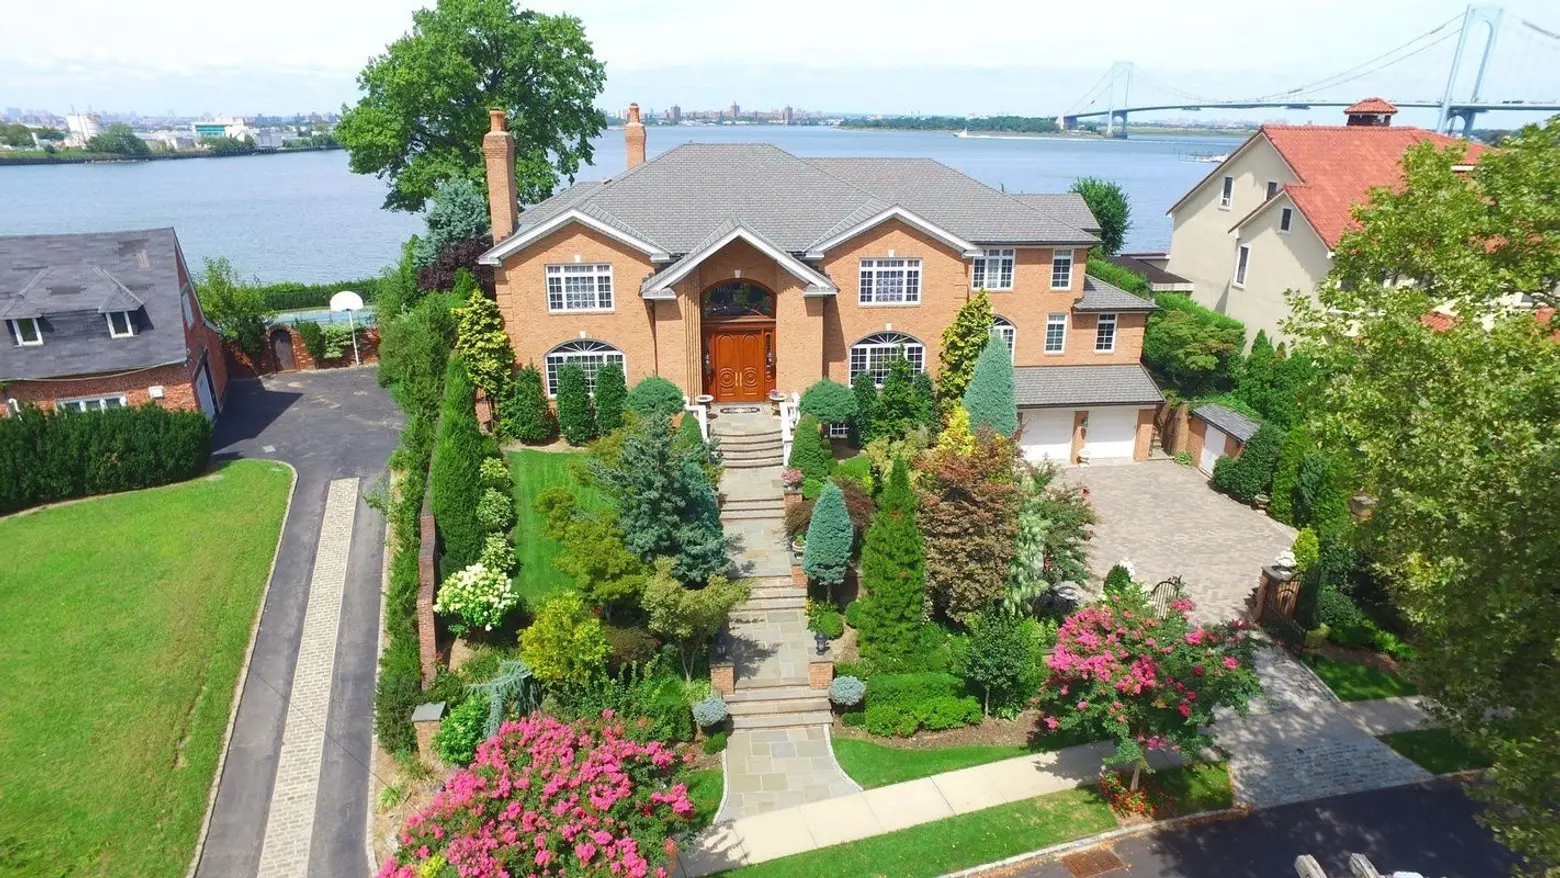 Malba mansion with views of the Whitestone Bridge and its own wood-fired pizza oven asks $8.8M